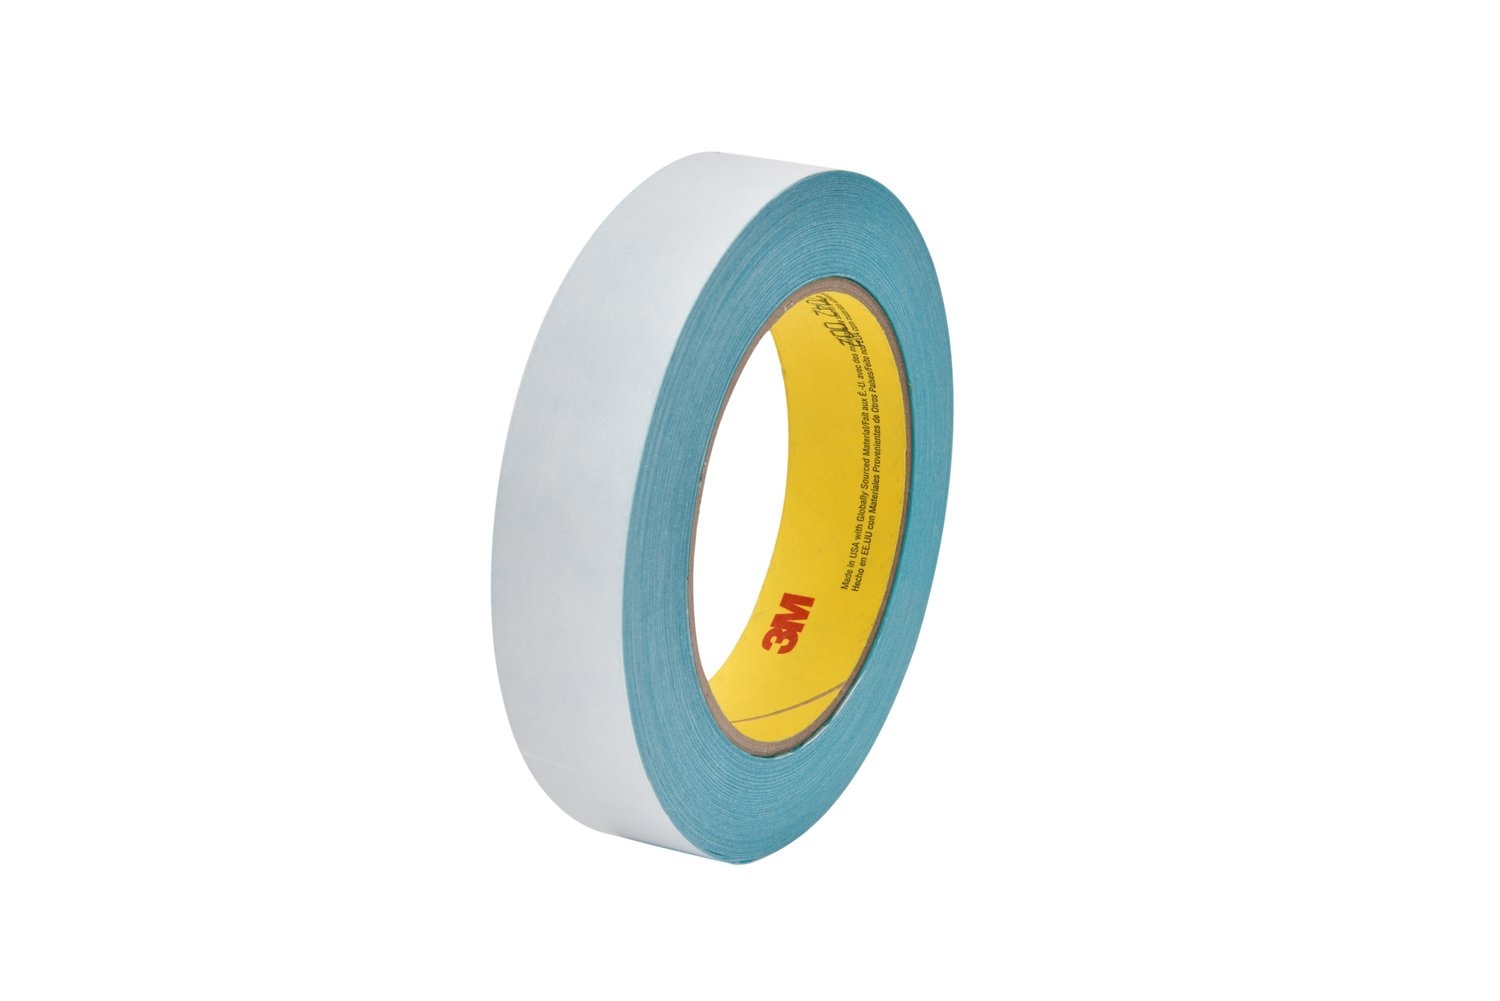 7100027396 - 3M Repulpable Double Coated Flying Splice Tape 913, Blue, 72 mm x 33 m,
3 mil, 12 rolls per case